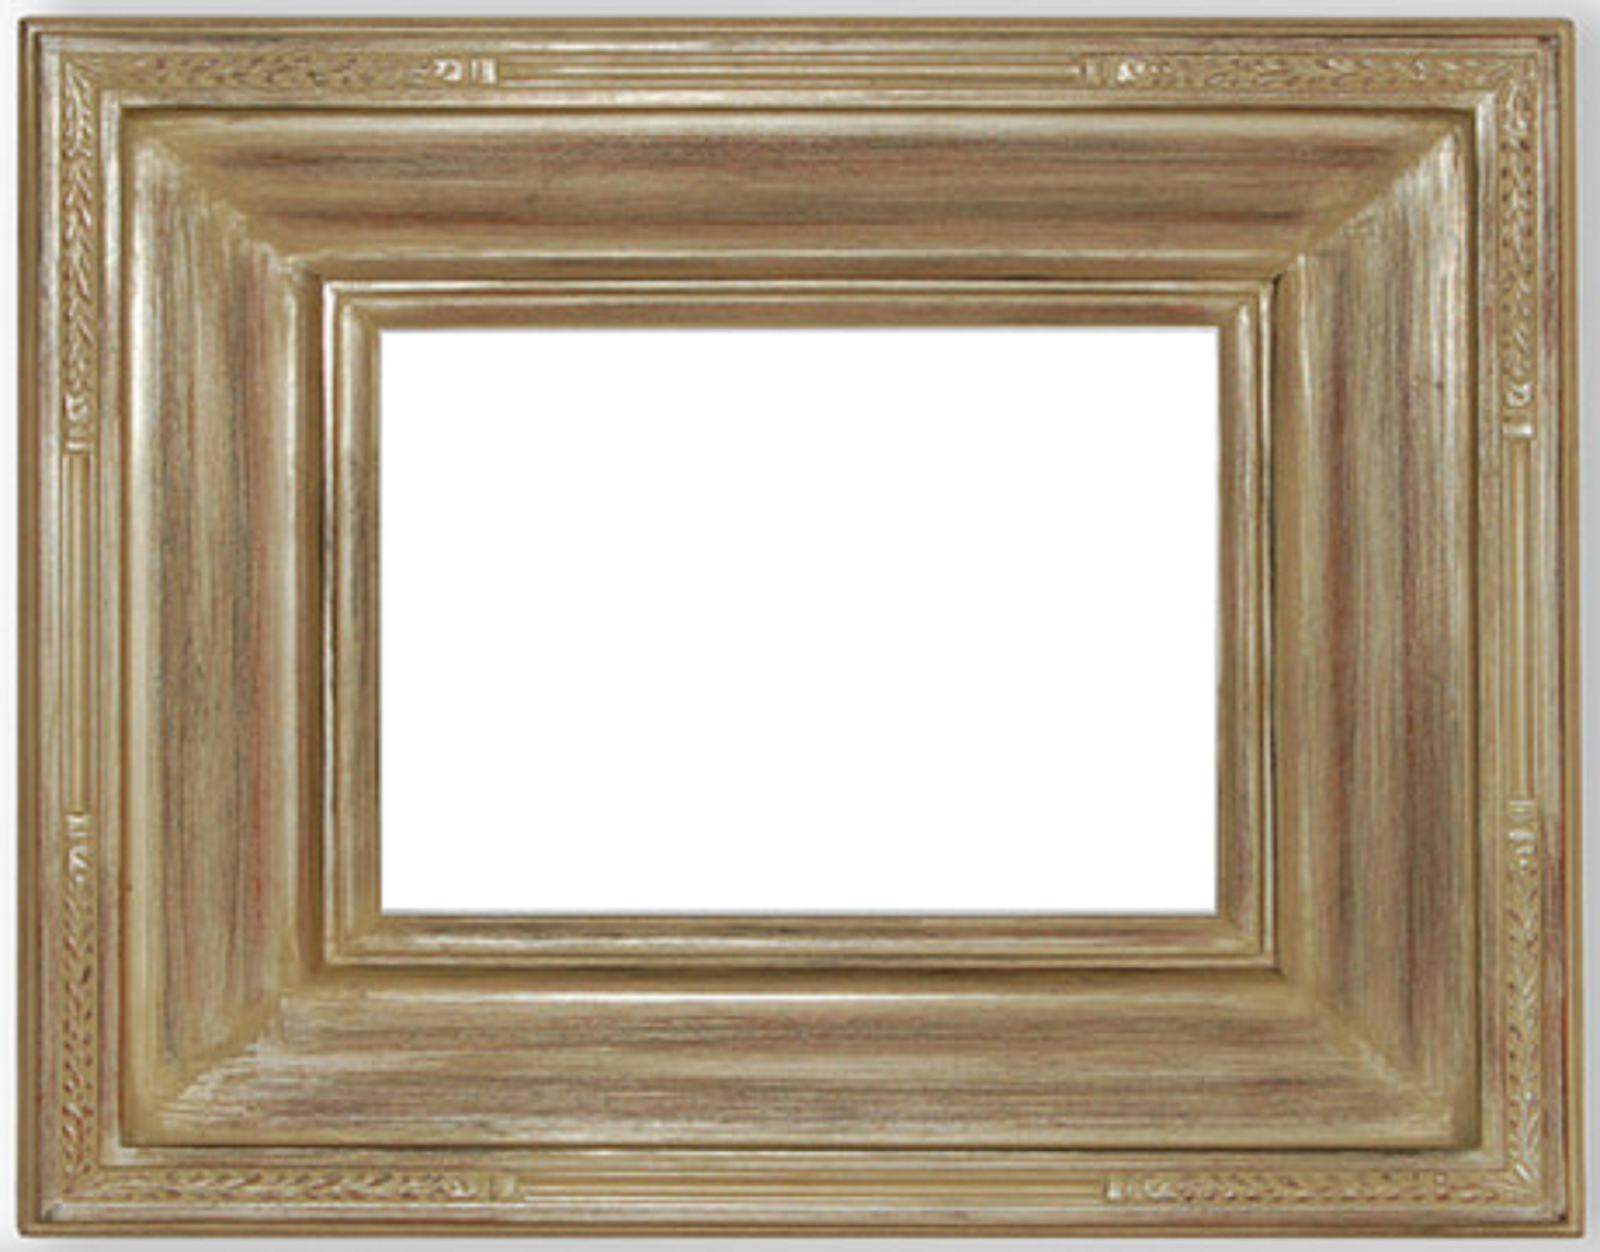 3.5/" fancy ornate kinkade Wood Antique silver Picture Gallery Frame 608S 24x36